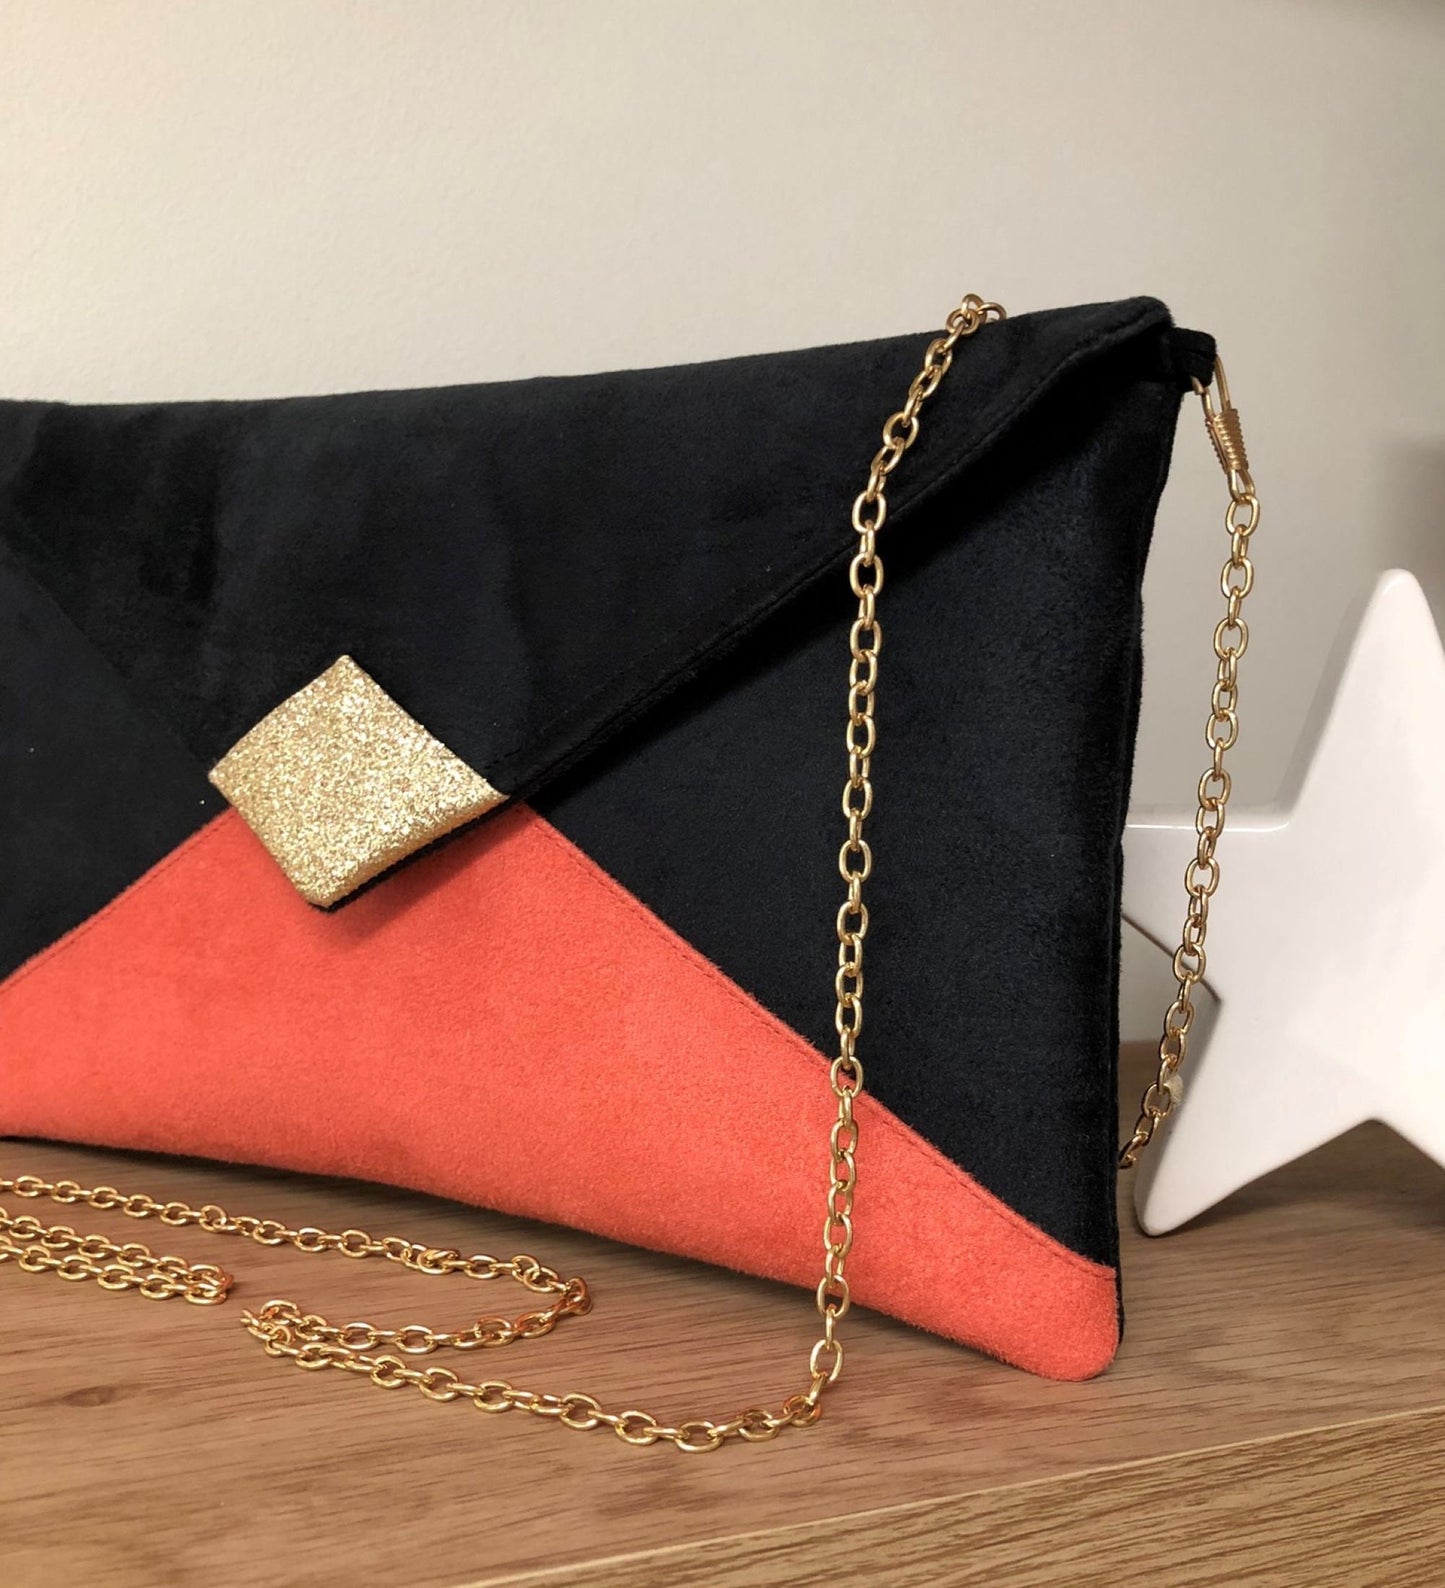 Black and coral Isa clutch bag with gold sequins